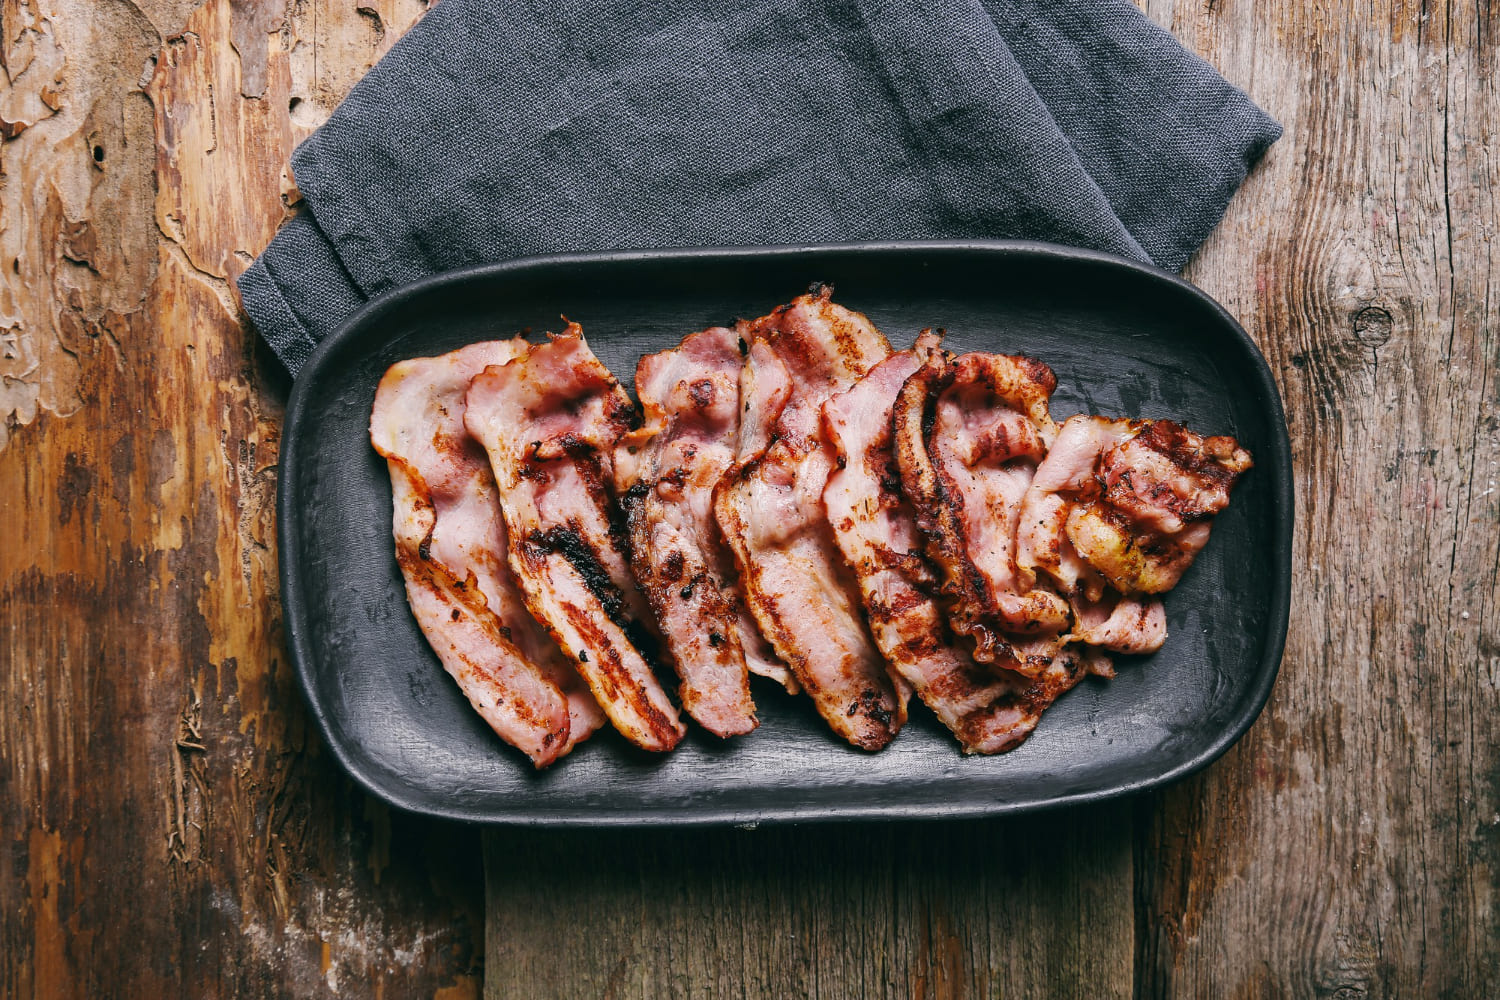 How to make bacon